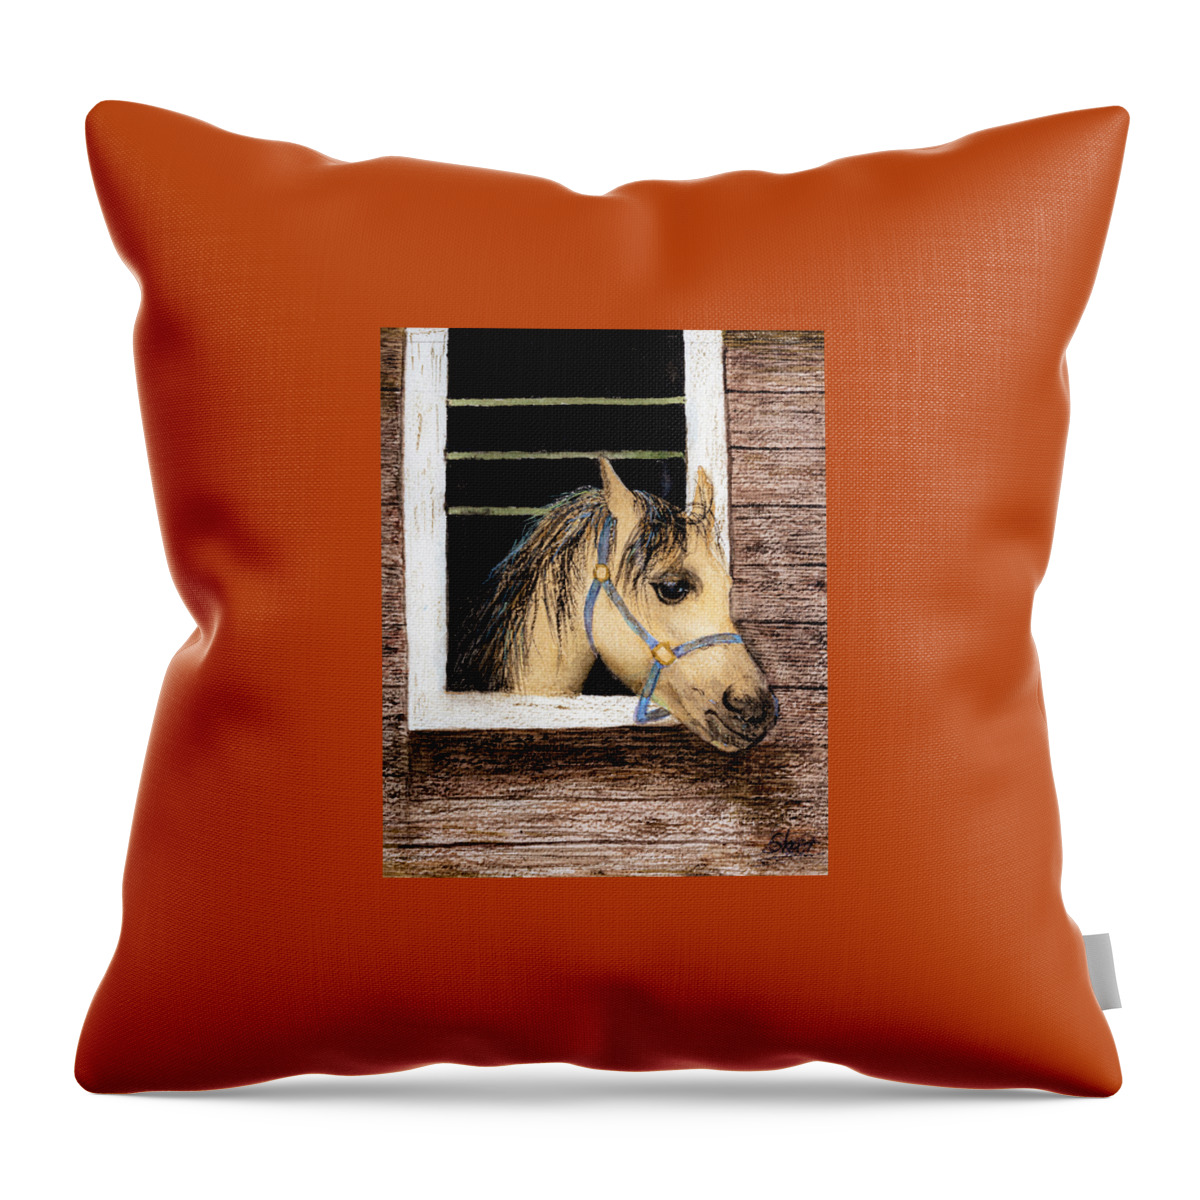 Art Awareness Light And Colour Throw Pillow featuring the painting Sherazad the Horse Watercolor Art by Sher Nasser